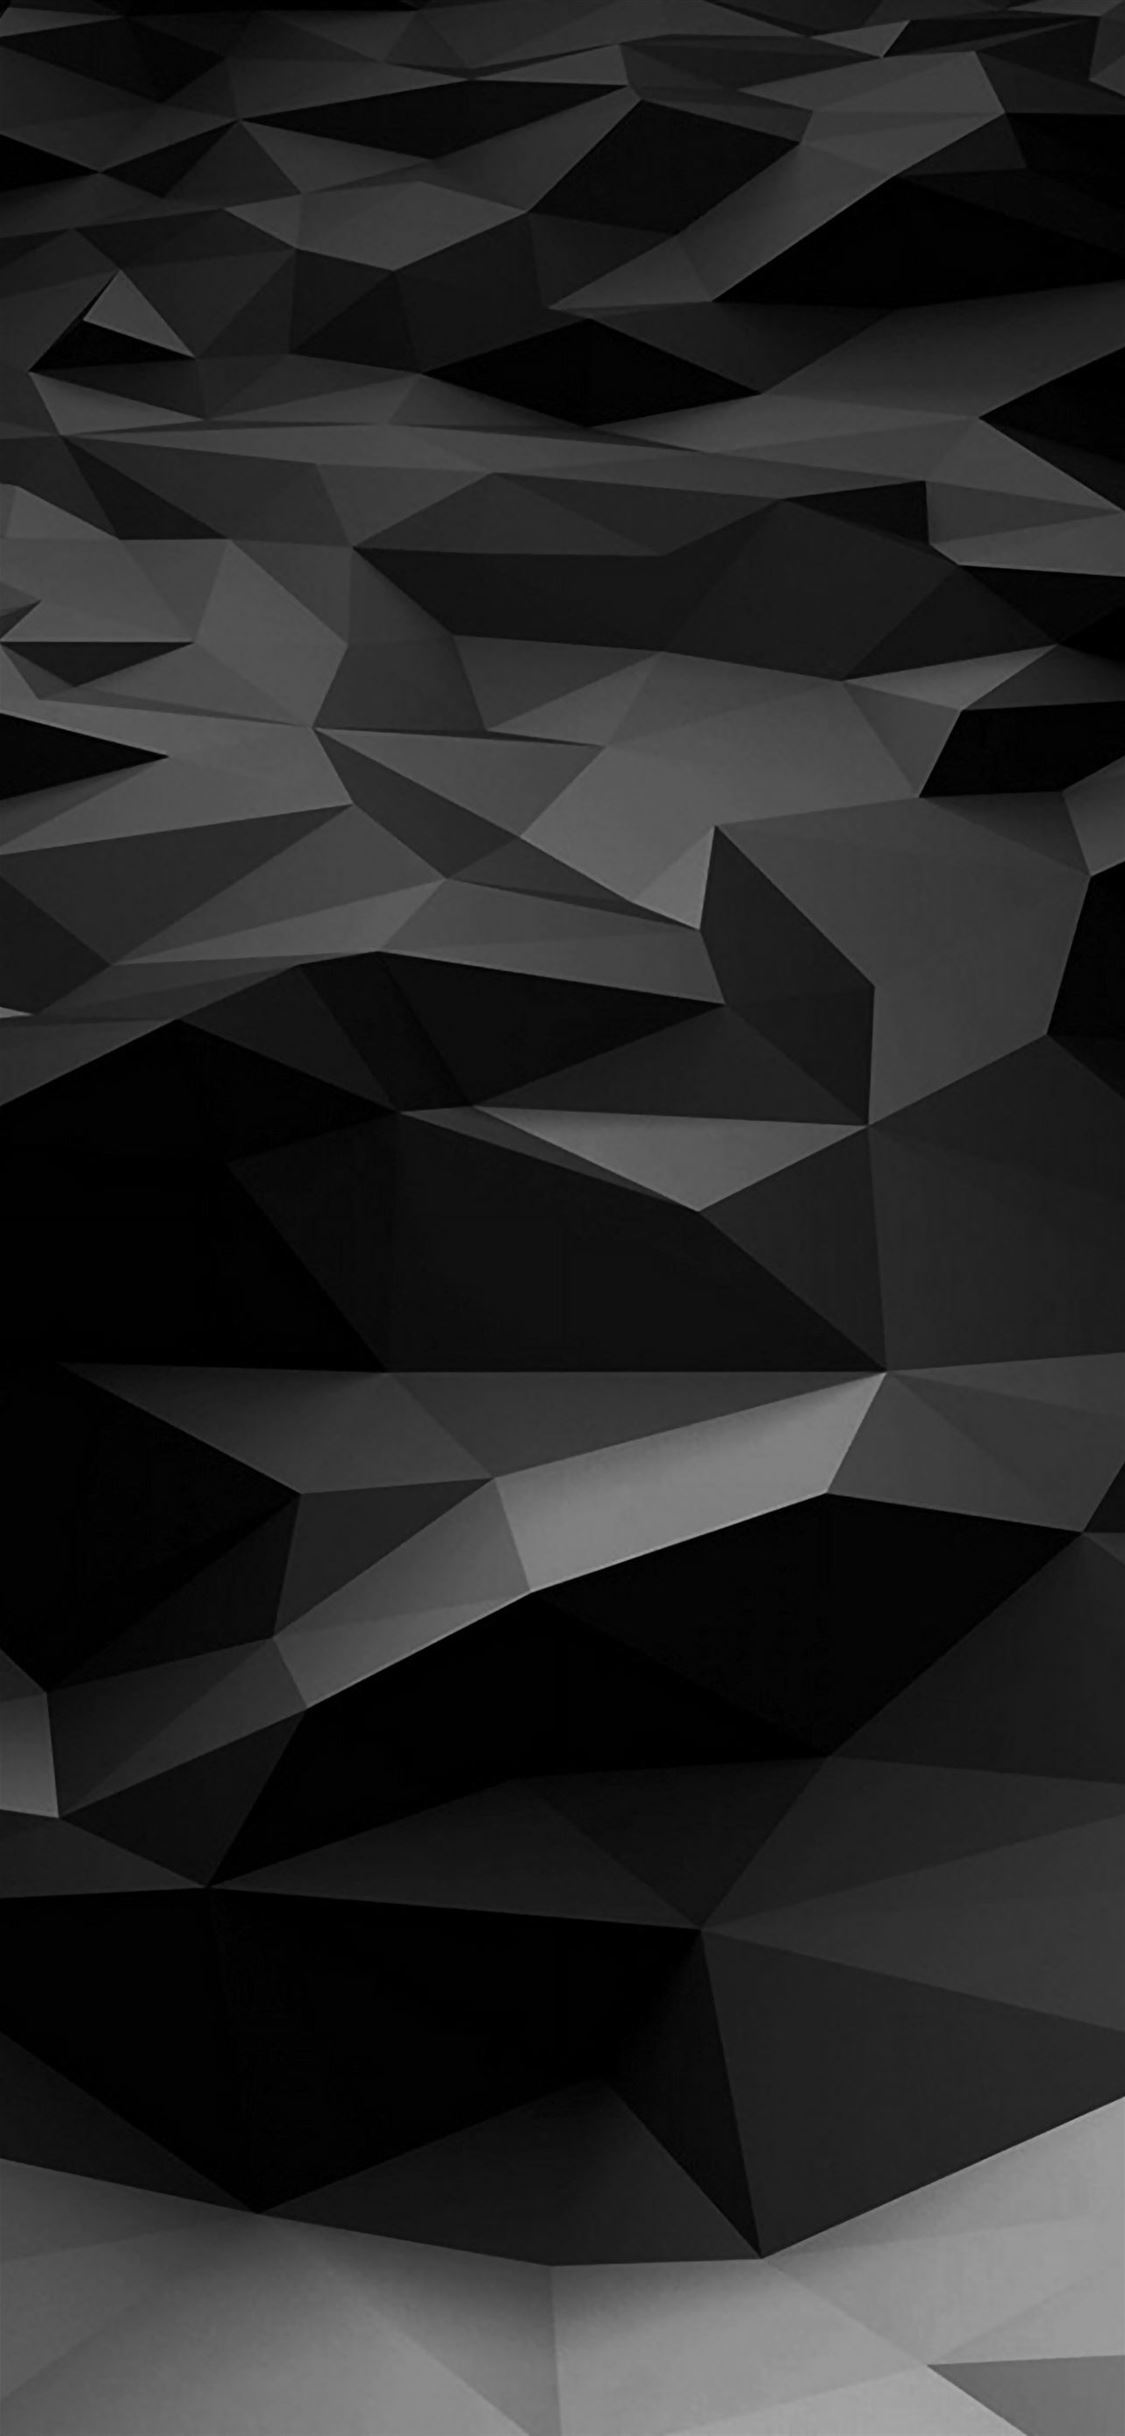 Low Poly Art Dark Bw Pattern iPhone Wallpapers Free Download